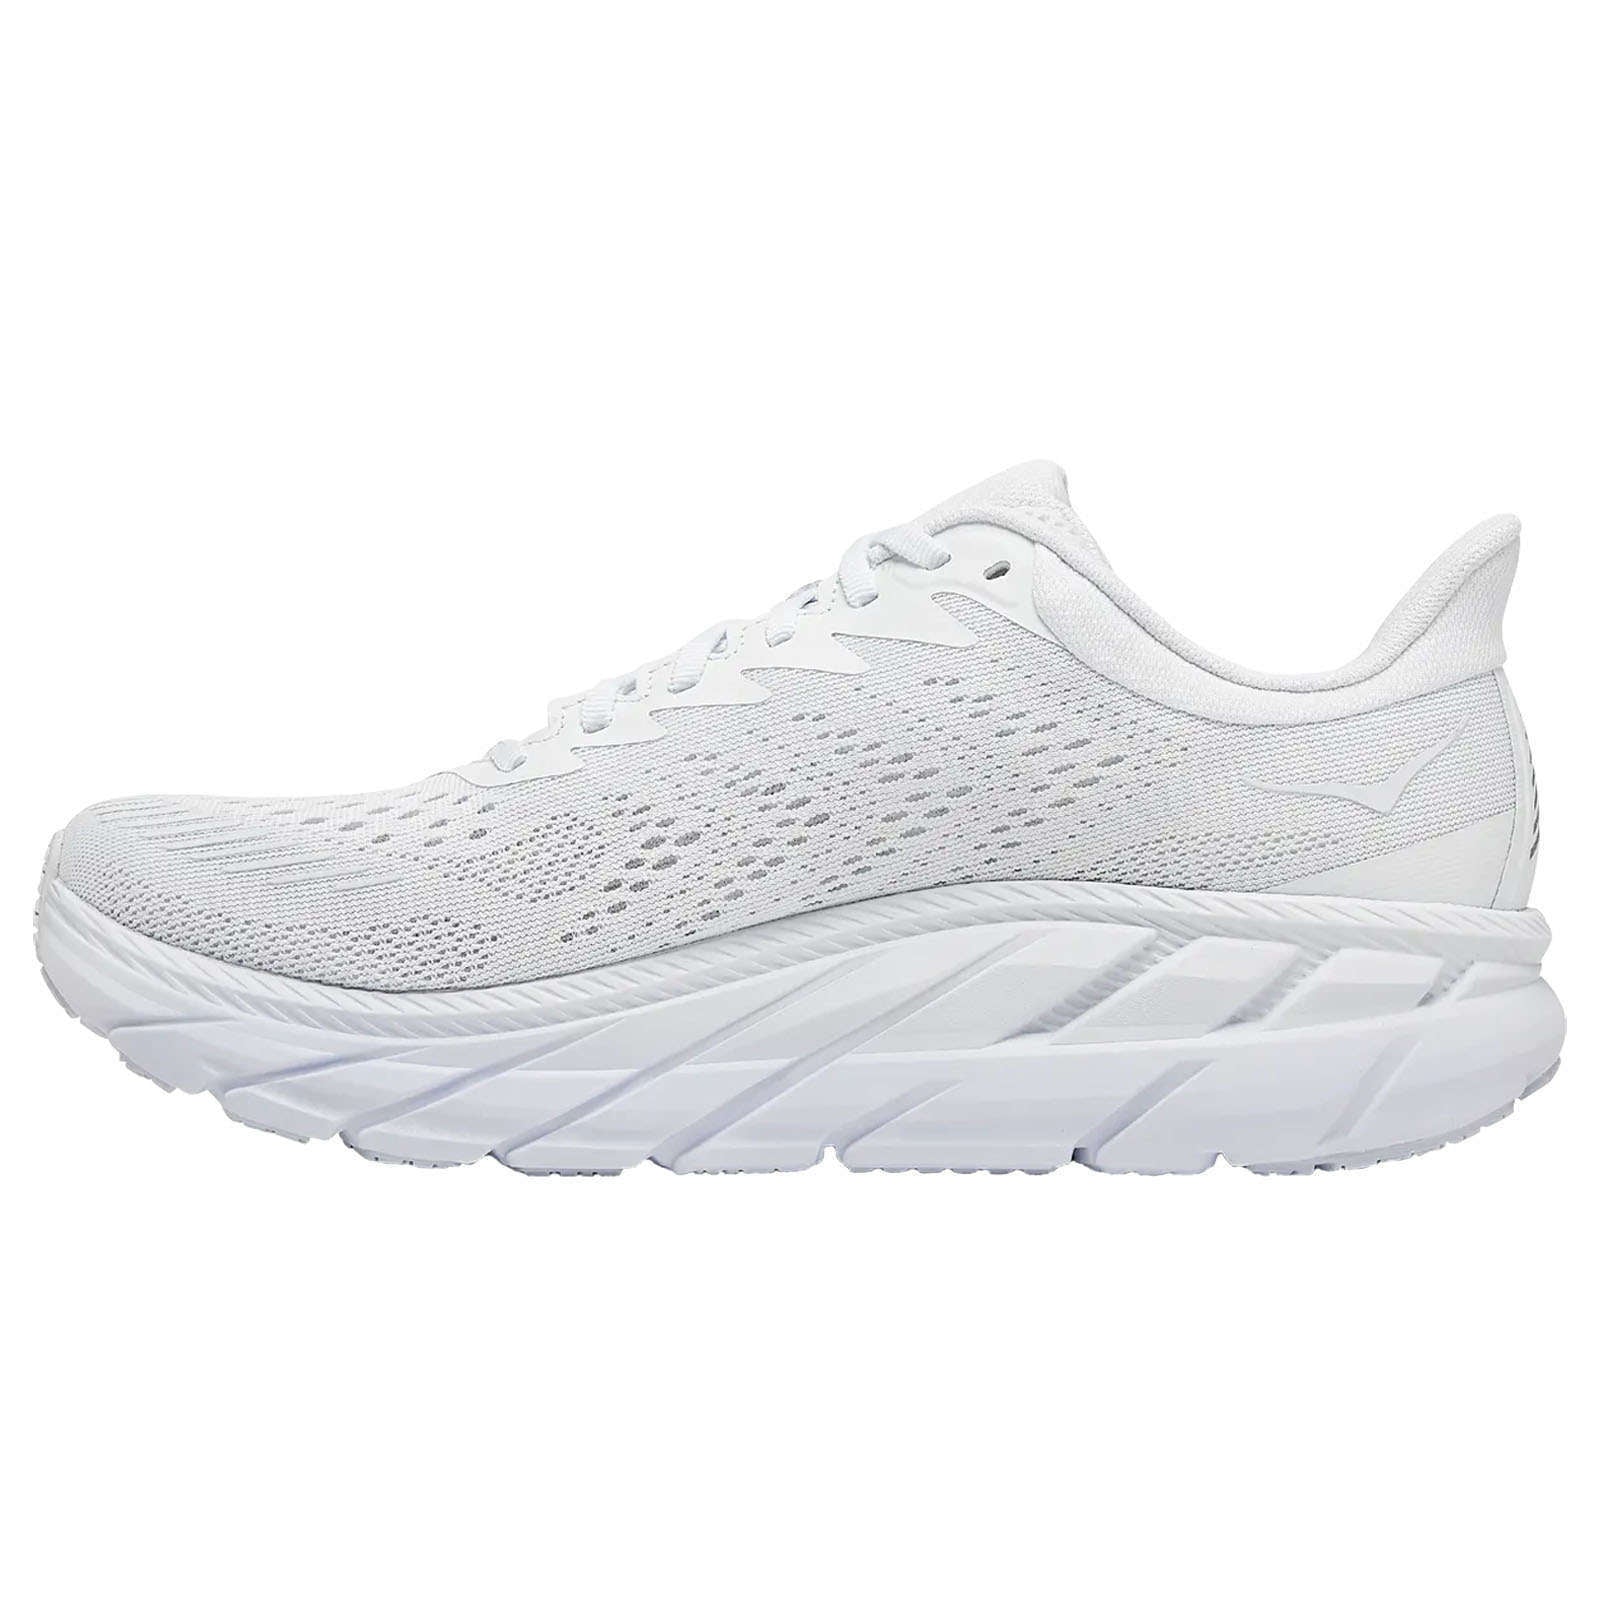 Hoka One One Clifton 7 Mesh Men's Low-Top Road Running Trainers#color_white white